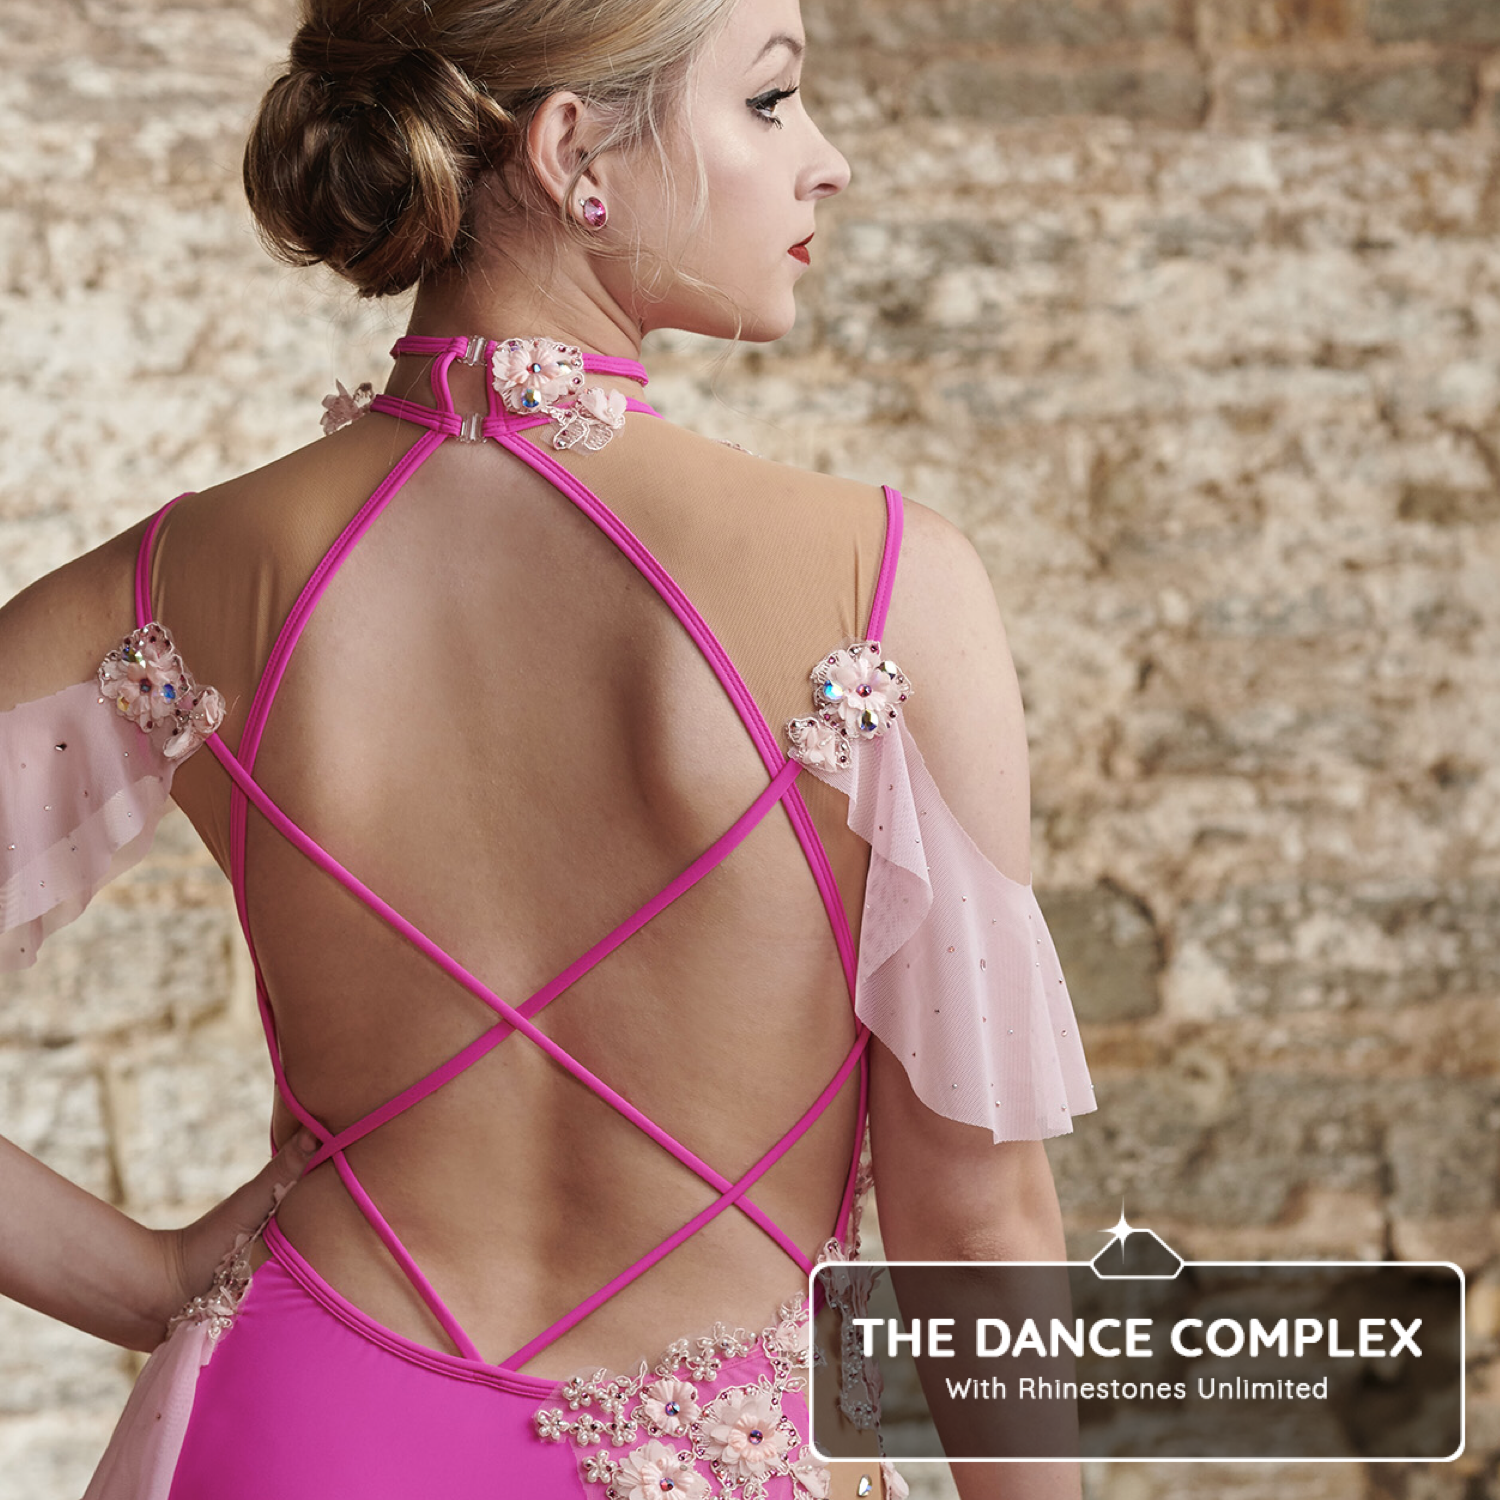 The Dance Complex with Rhinestones Unlimited